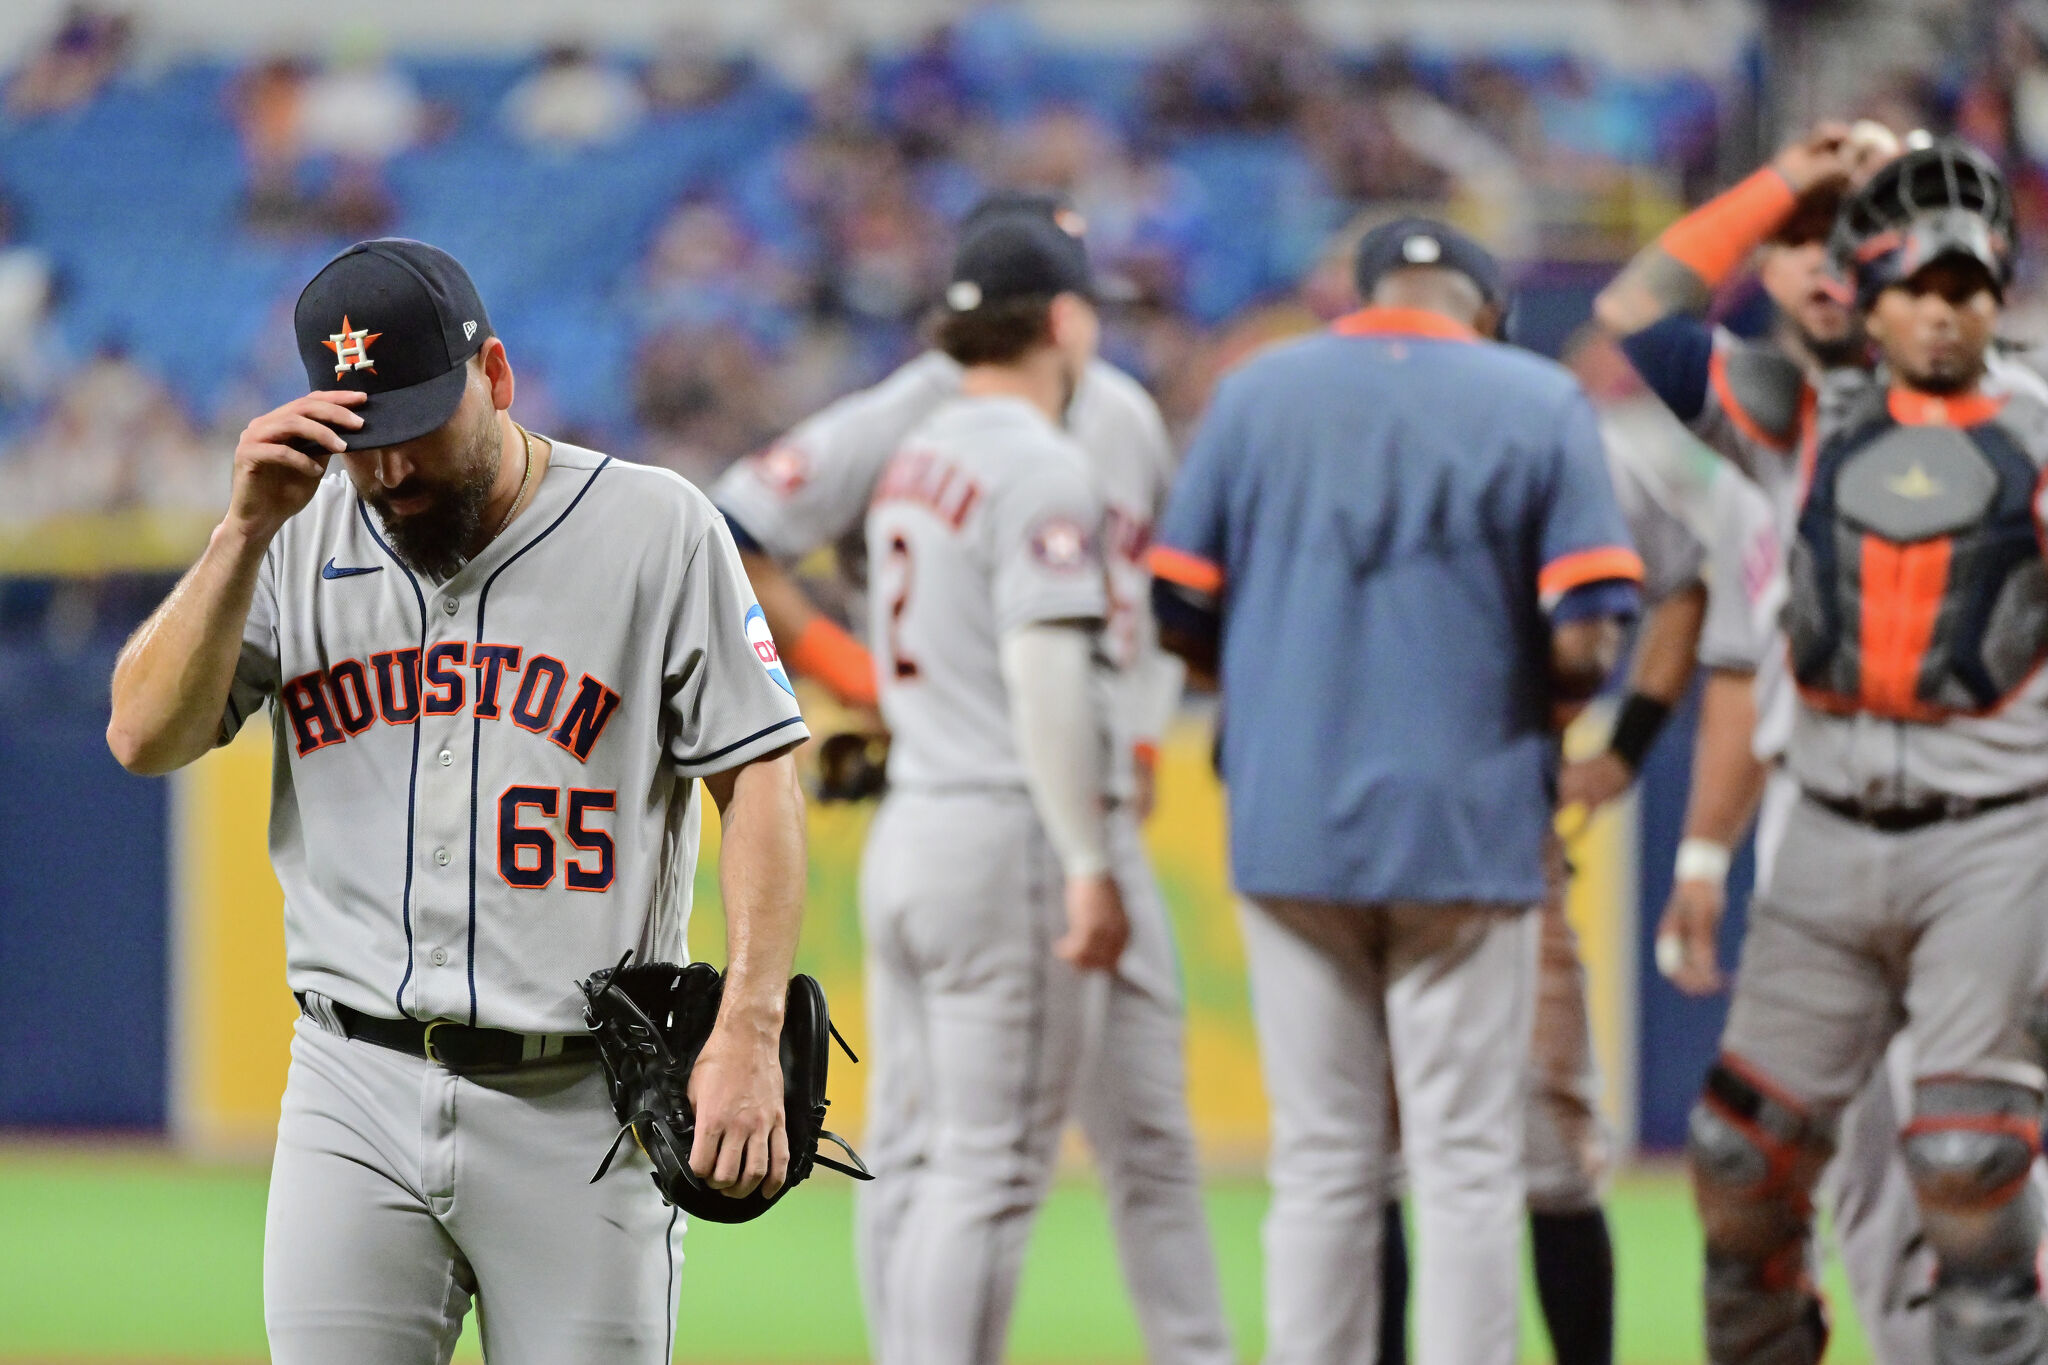 Astros' Luis Garcia Leaves ALCS Game 2 With Apparent Injury - MLB